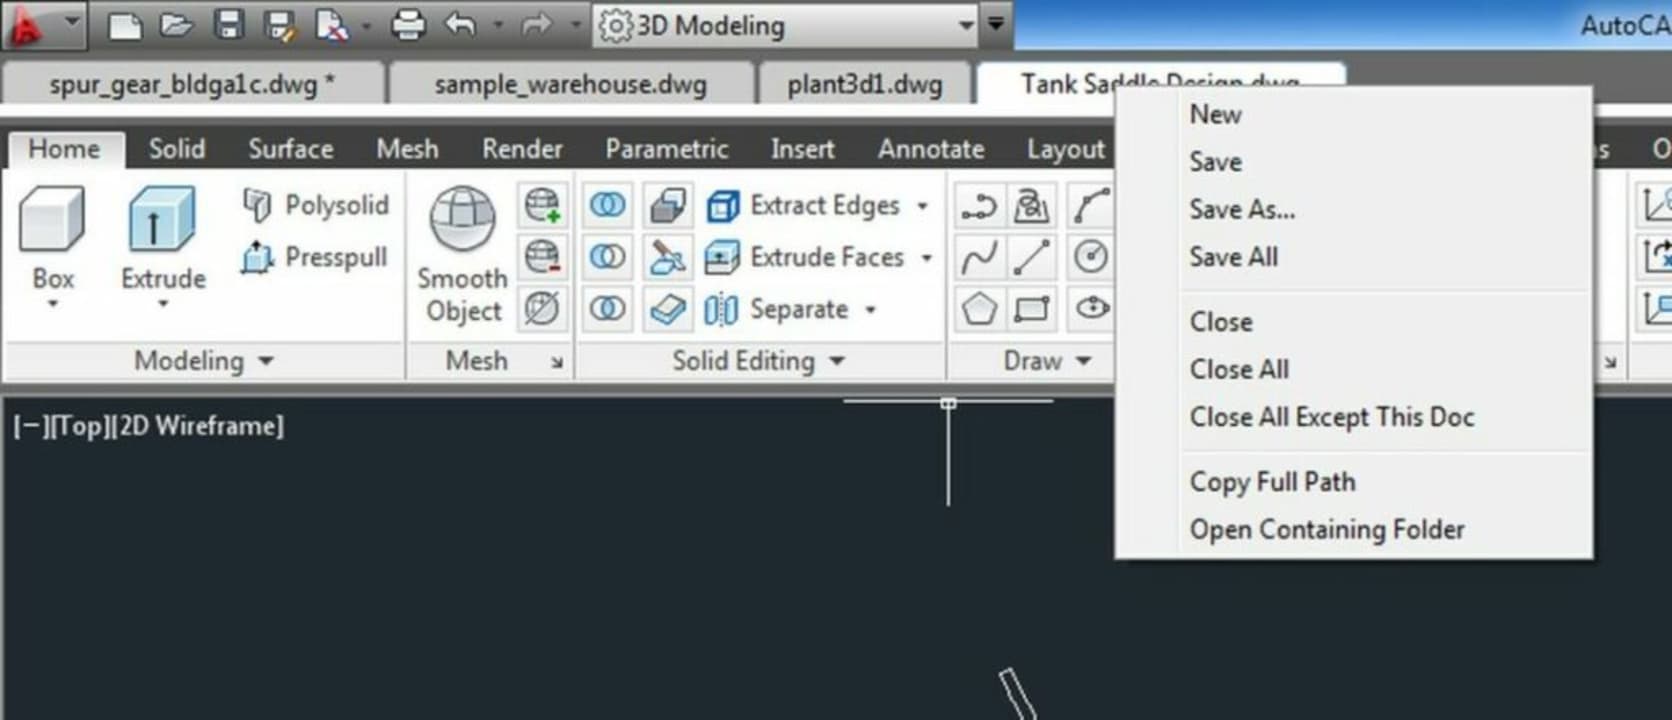 Type Closeall in the command prompt and all your drawings close simultaneously